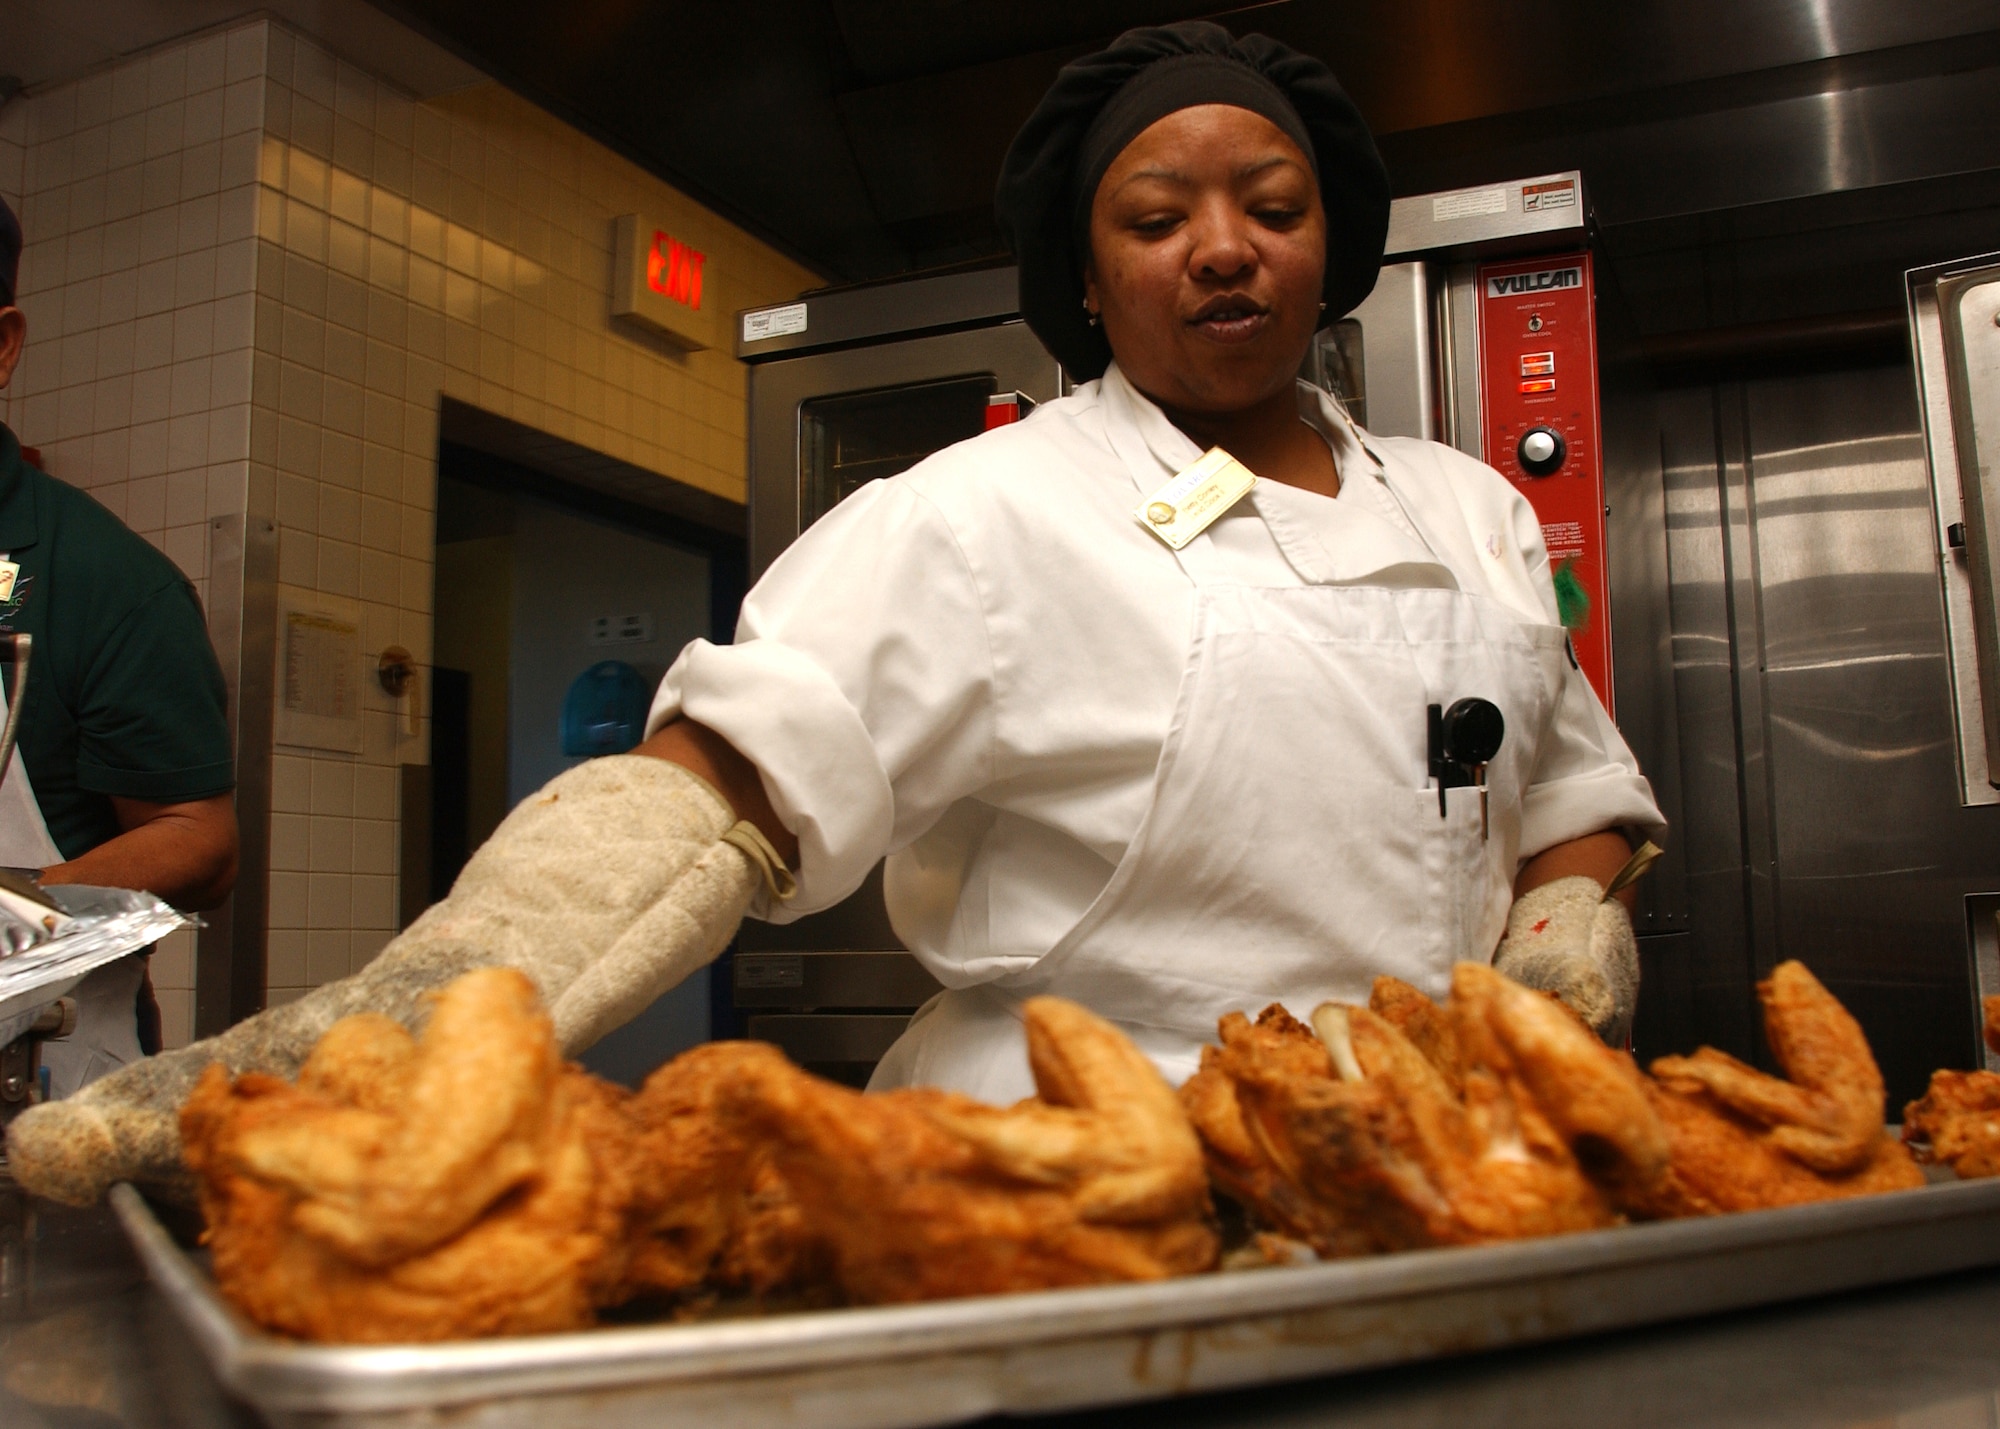 Betty Conley, a 30th Services Division lead cook, prepares chicken at Breakers Dining Facility on Vandenberg AFB.  Food preparation starts early each day to ensure freshness and quantity requirements are met before serving. (U.S. Air Force photo by Airman Adam Guy)